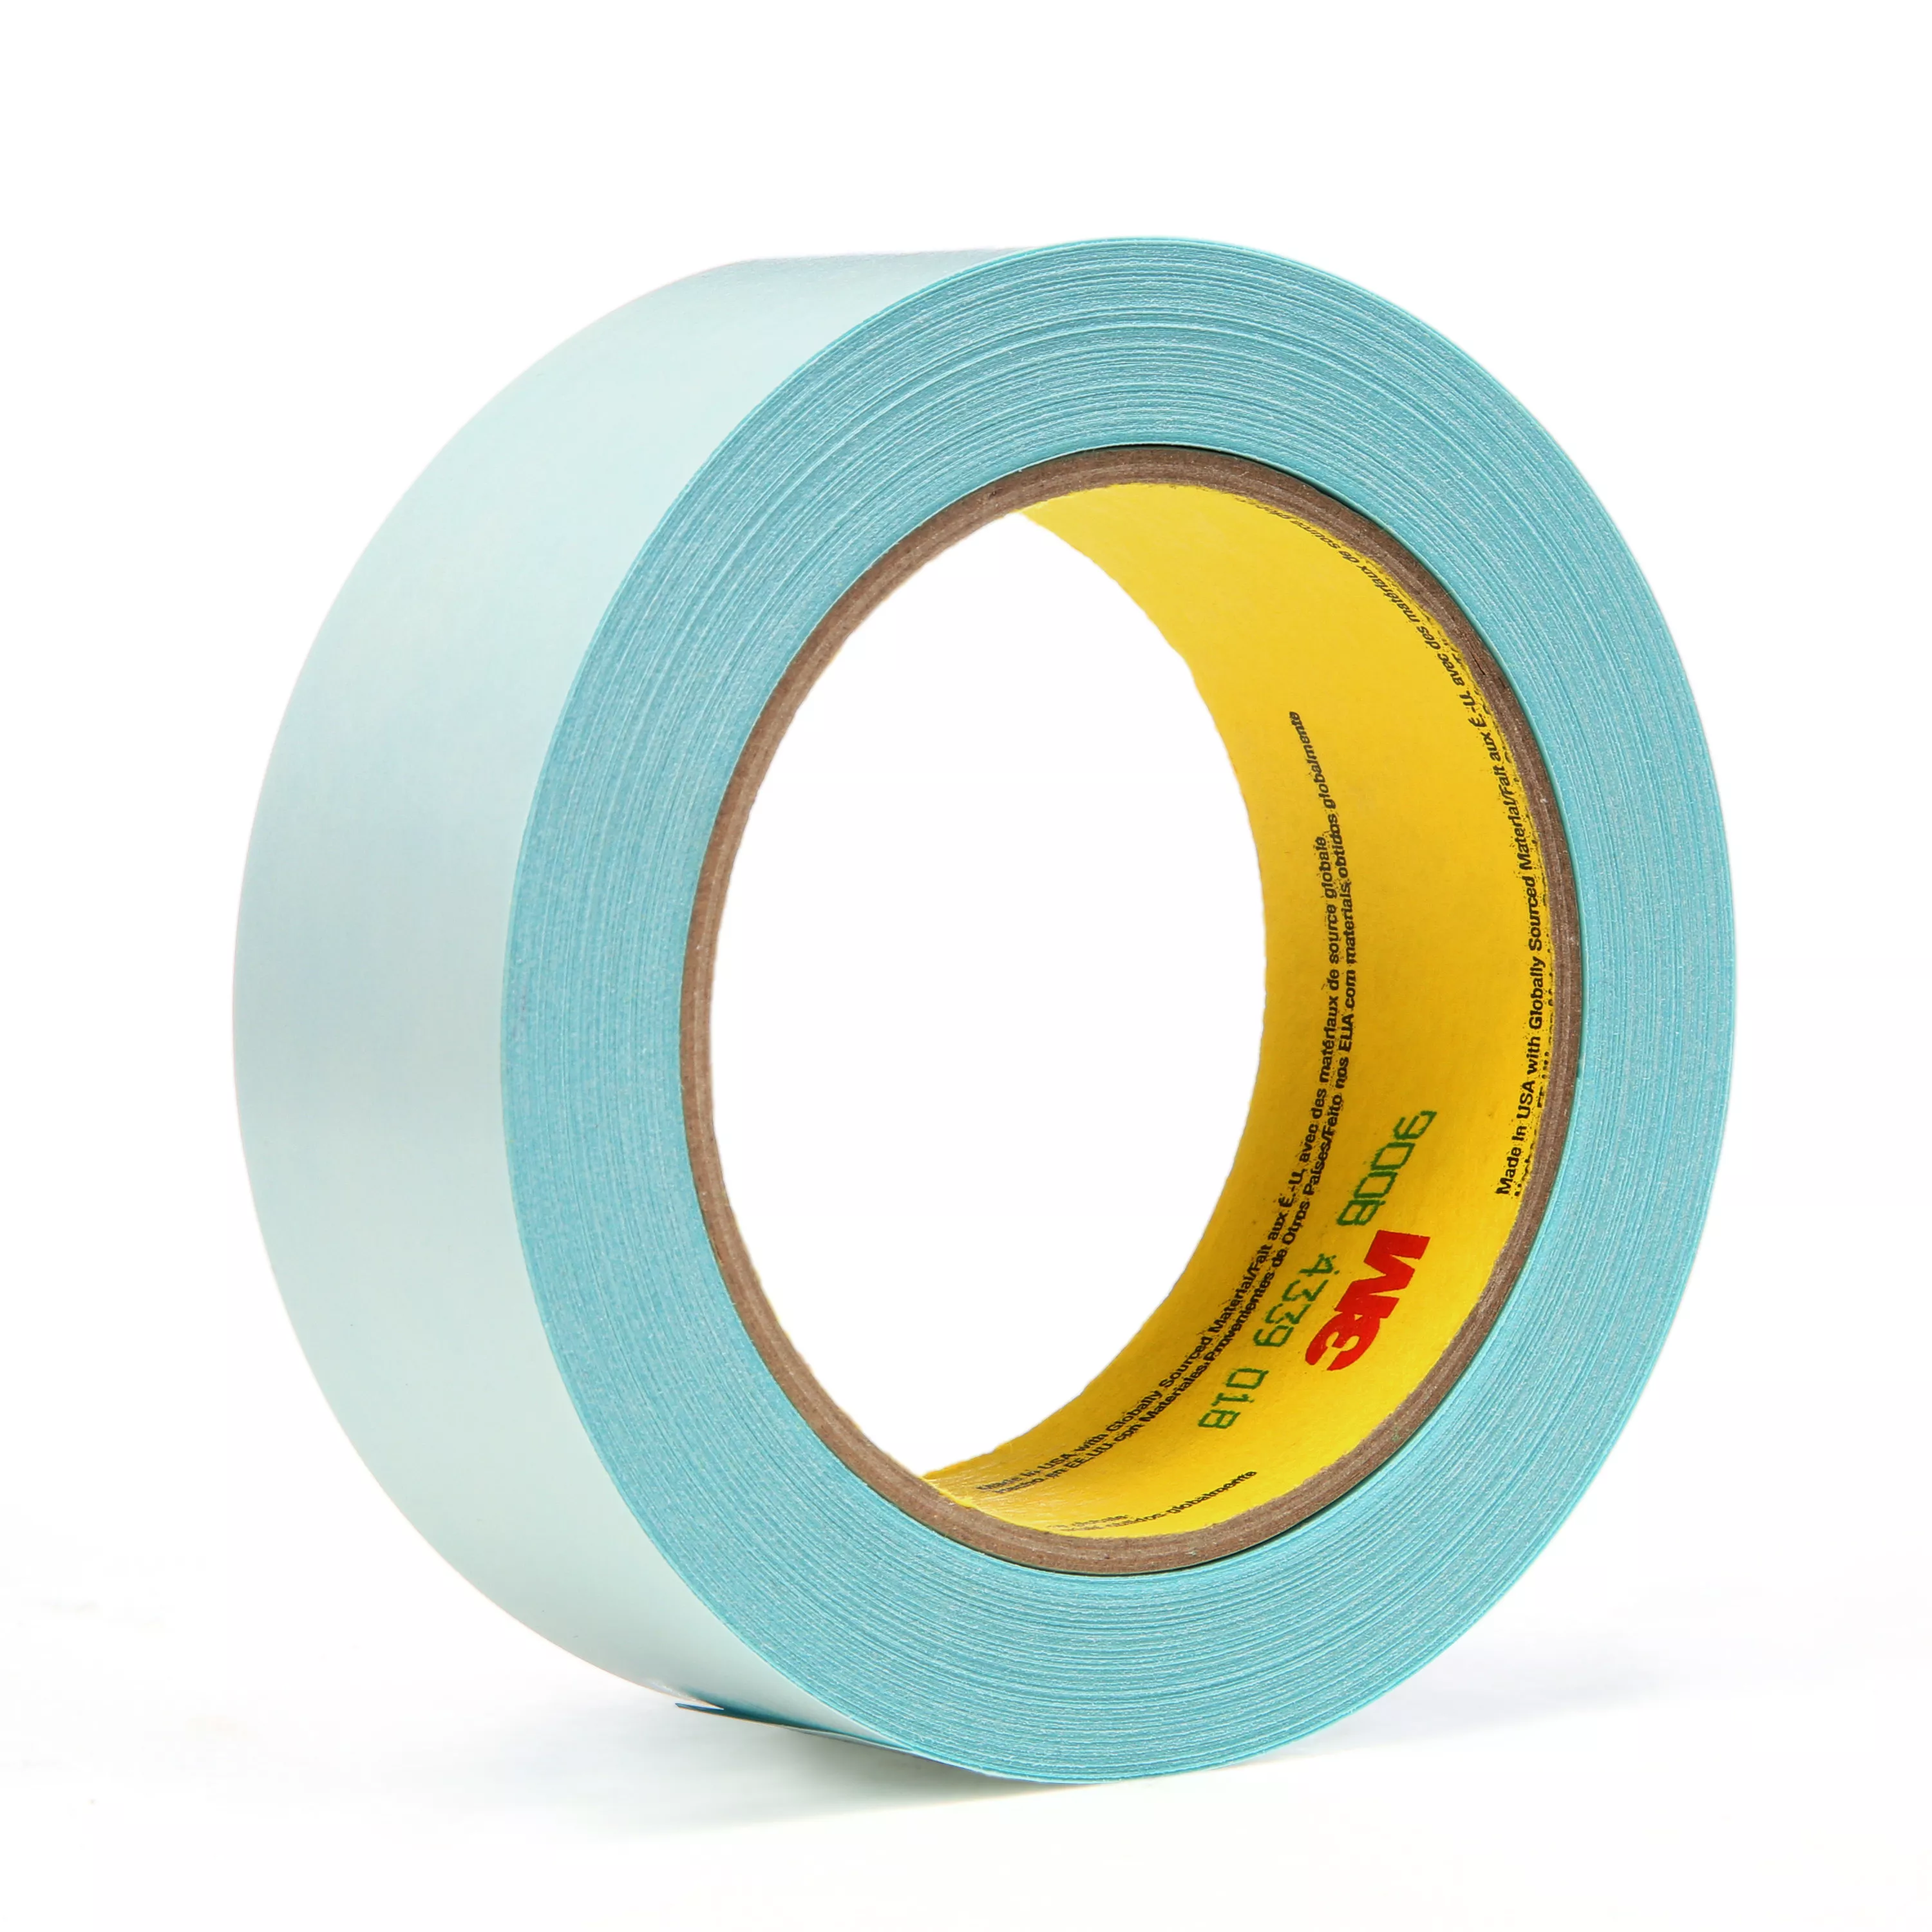 3M™ Repulpable Double Coated Splicing Tape 900, 24 mm x 33 m, 2.5 mil,
36 Roll/Case